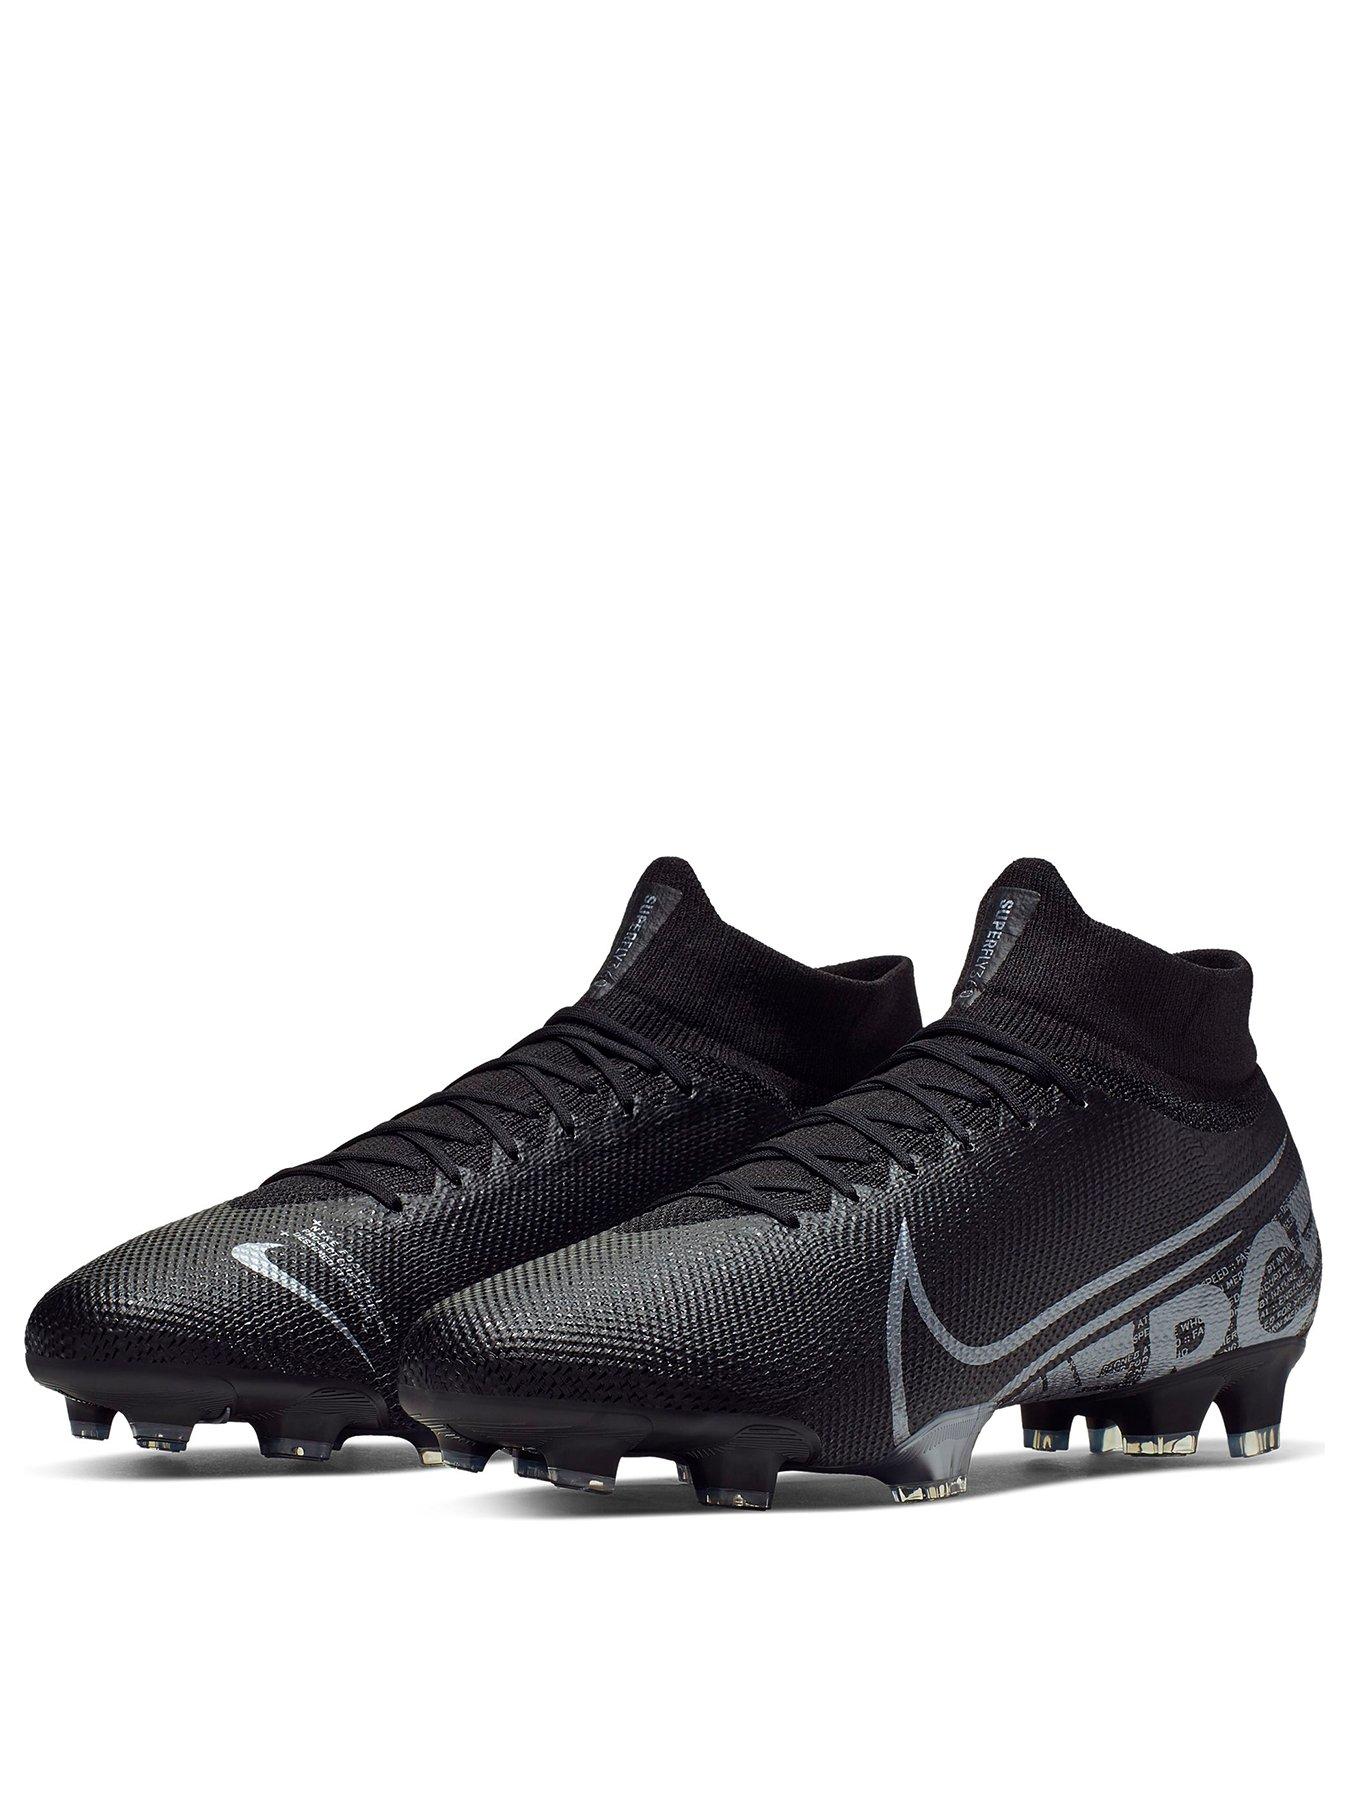 Football Boots Nike Mercurial Superfly VII Elite Special Edition.